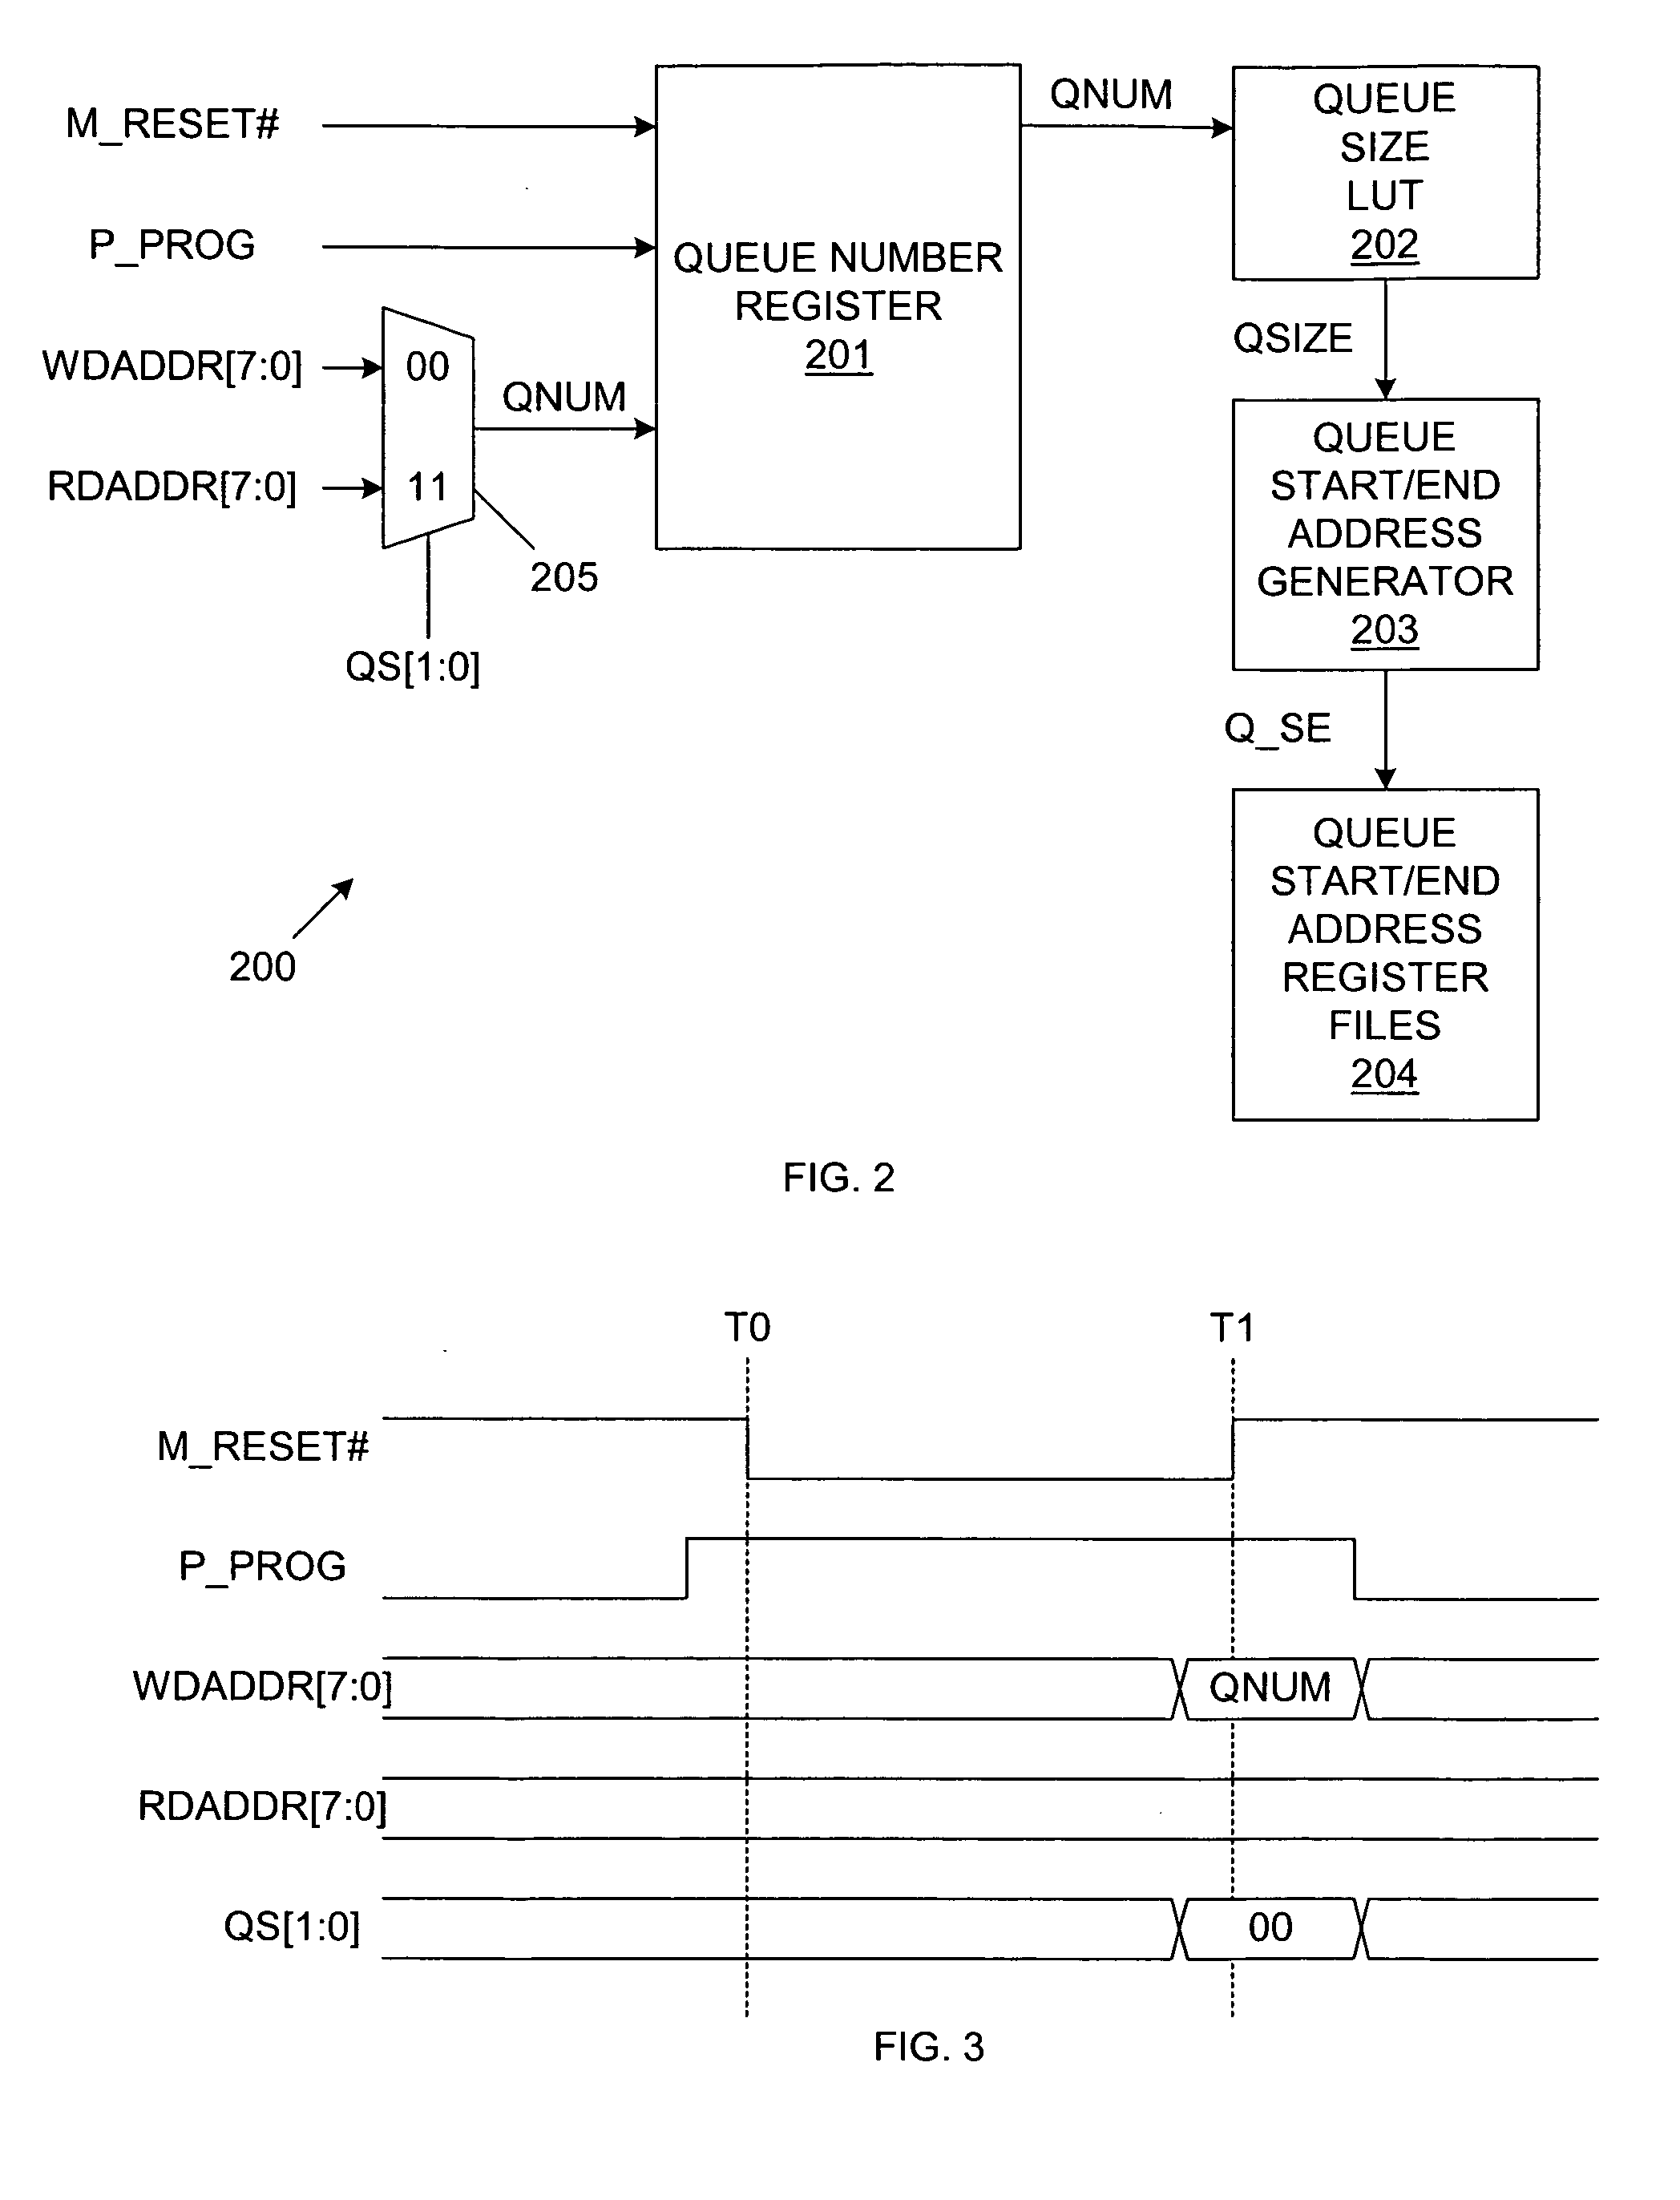 Multi-queue address generator for start and end addresses in a multi-queue first-in first-out memory system